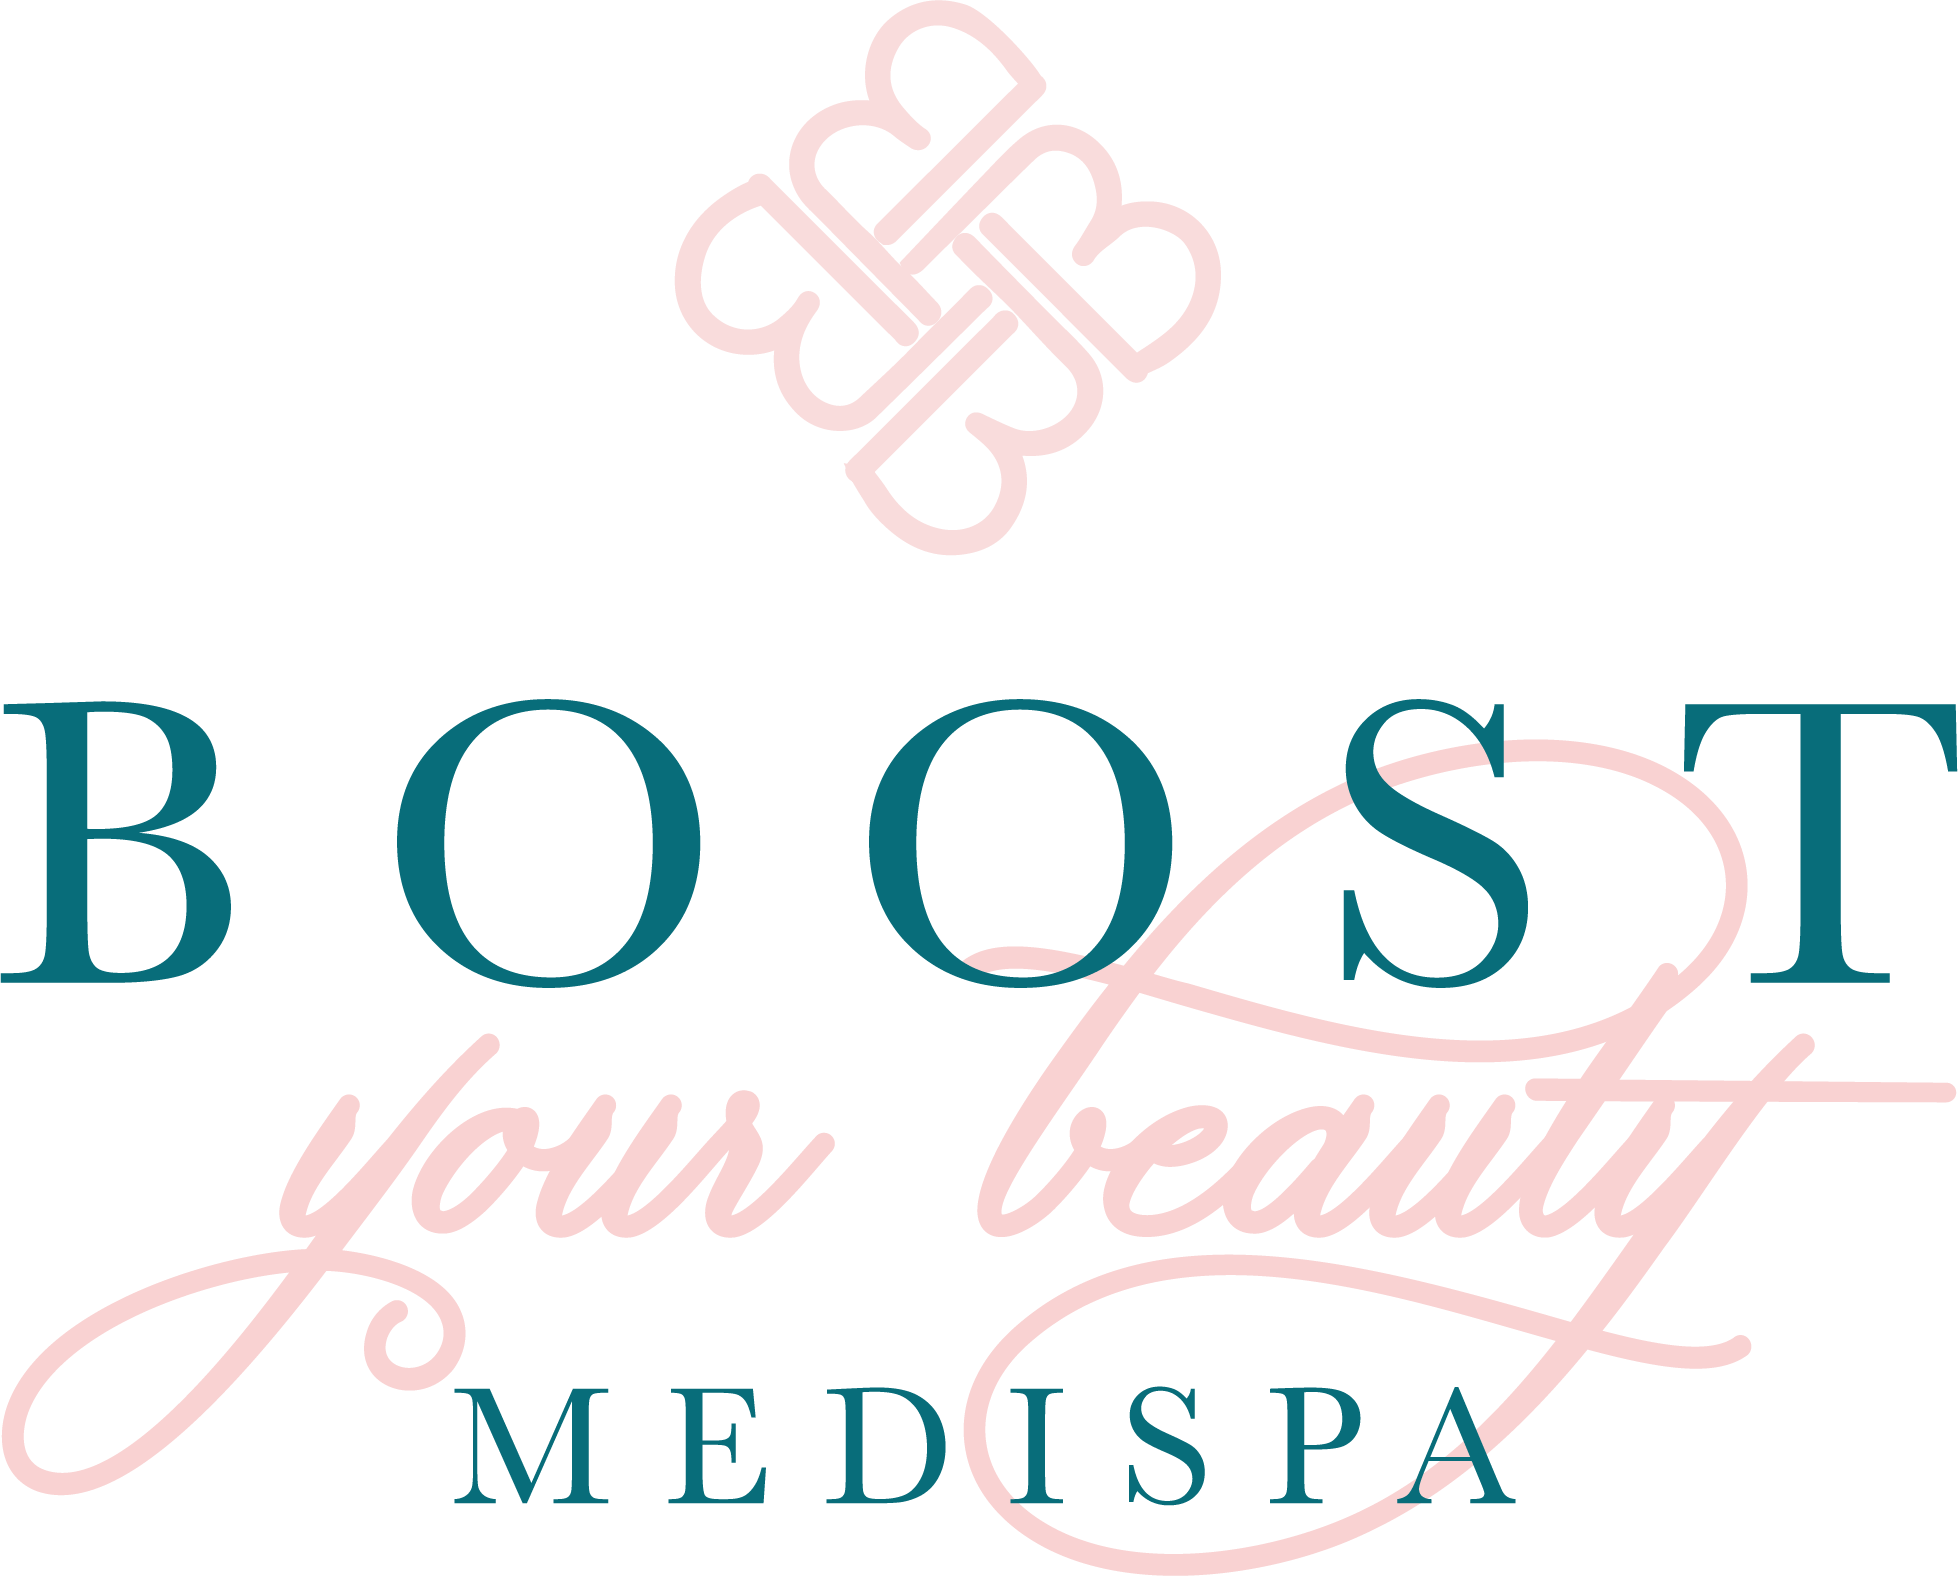 Gerald A. Acker, MD managed by Boost Your Beauty MediSpa